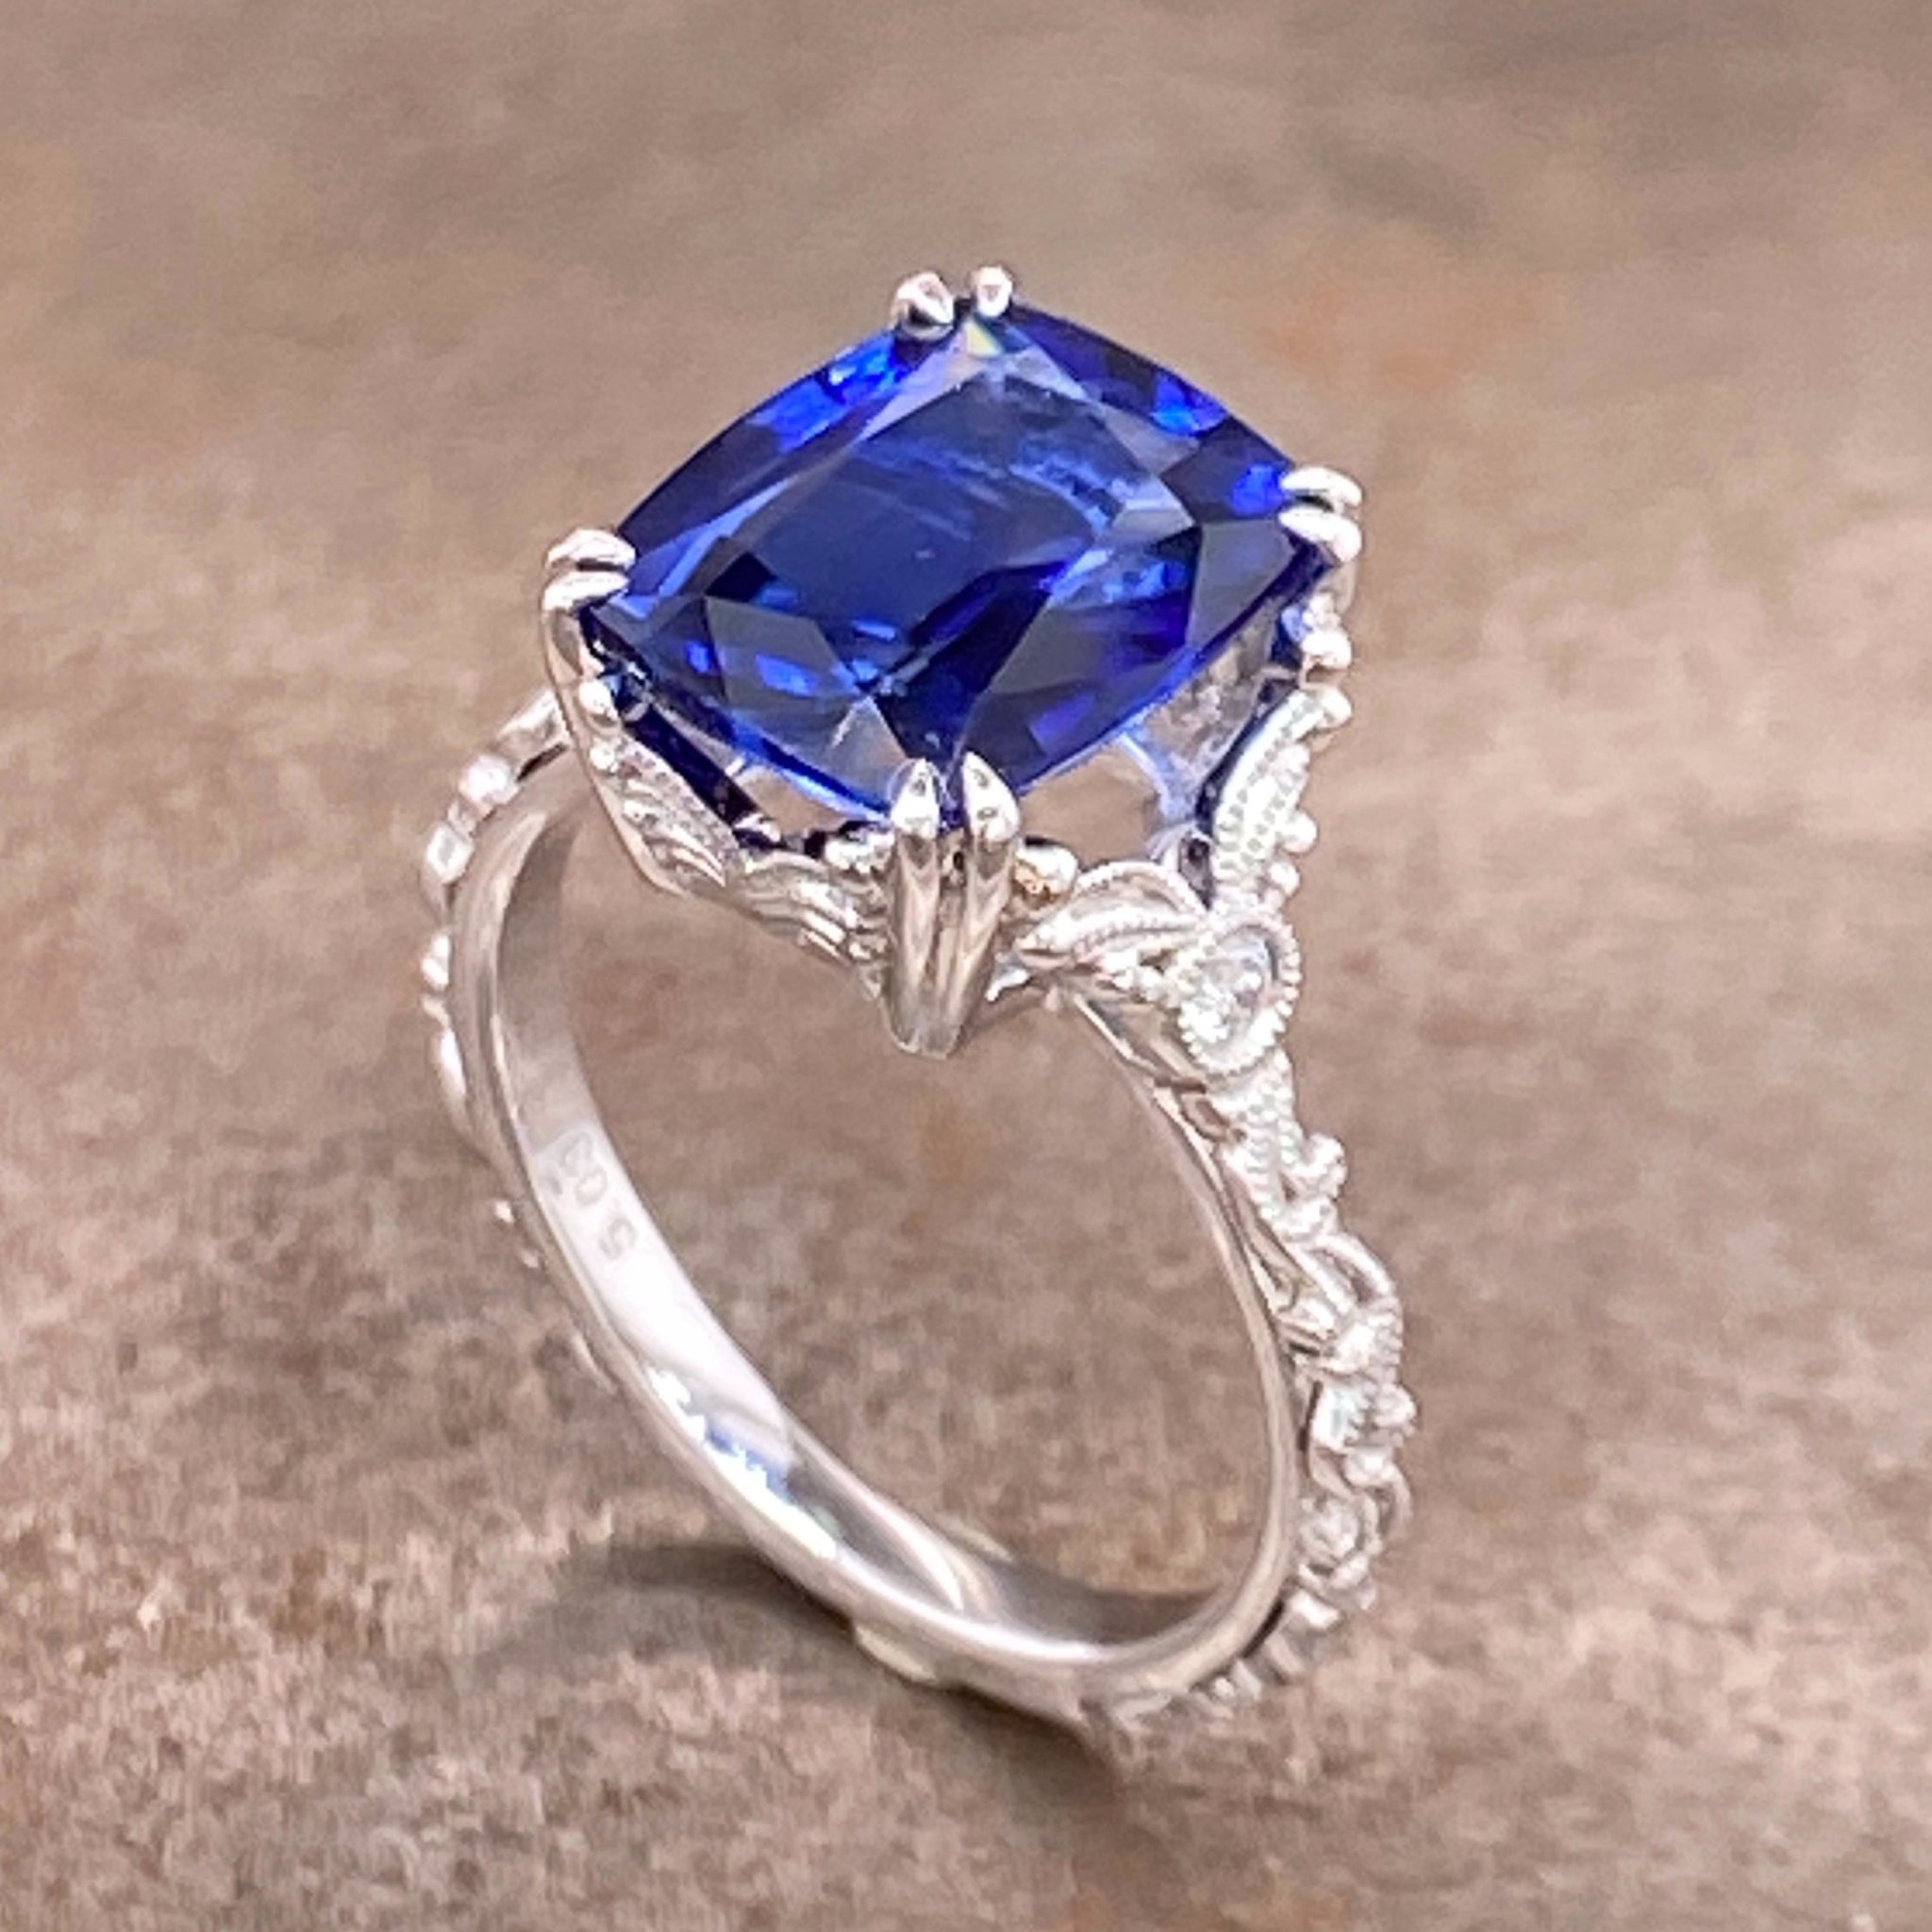 Opposite aerial angled view of sapphire and 14 karat white gold ring.